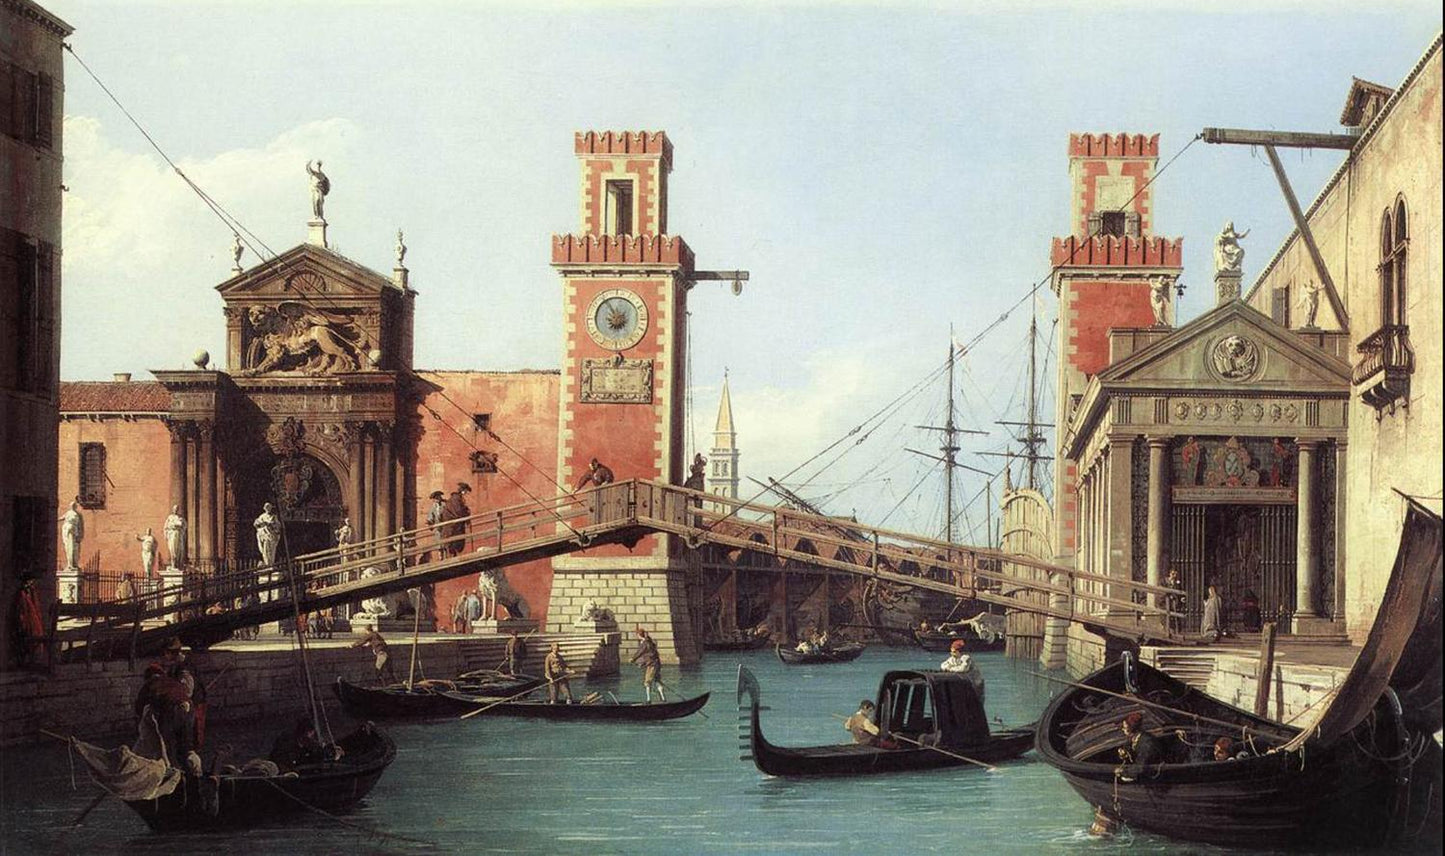 View of the entrance to the Arsenal, Canaletto